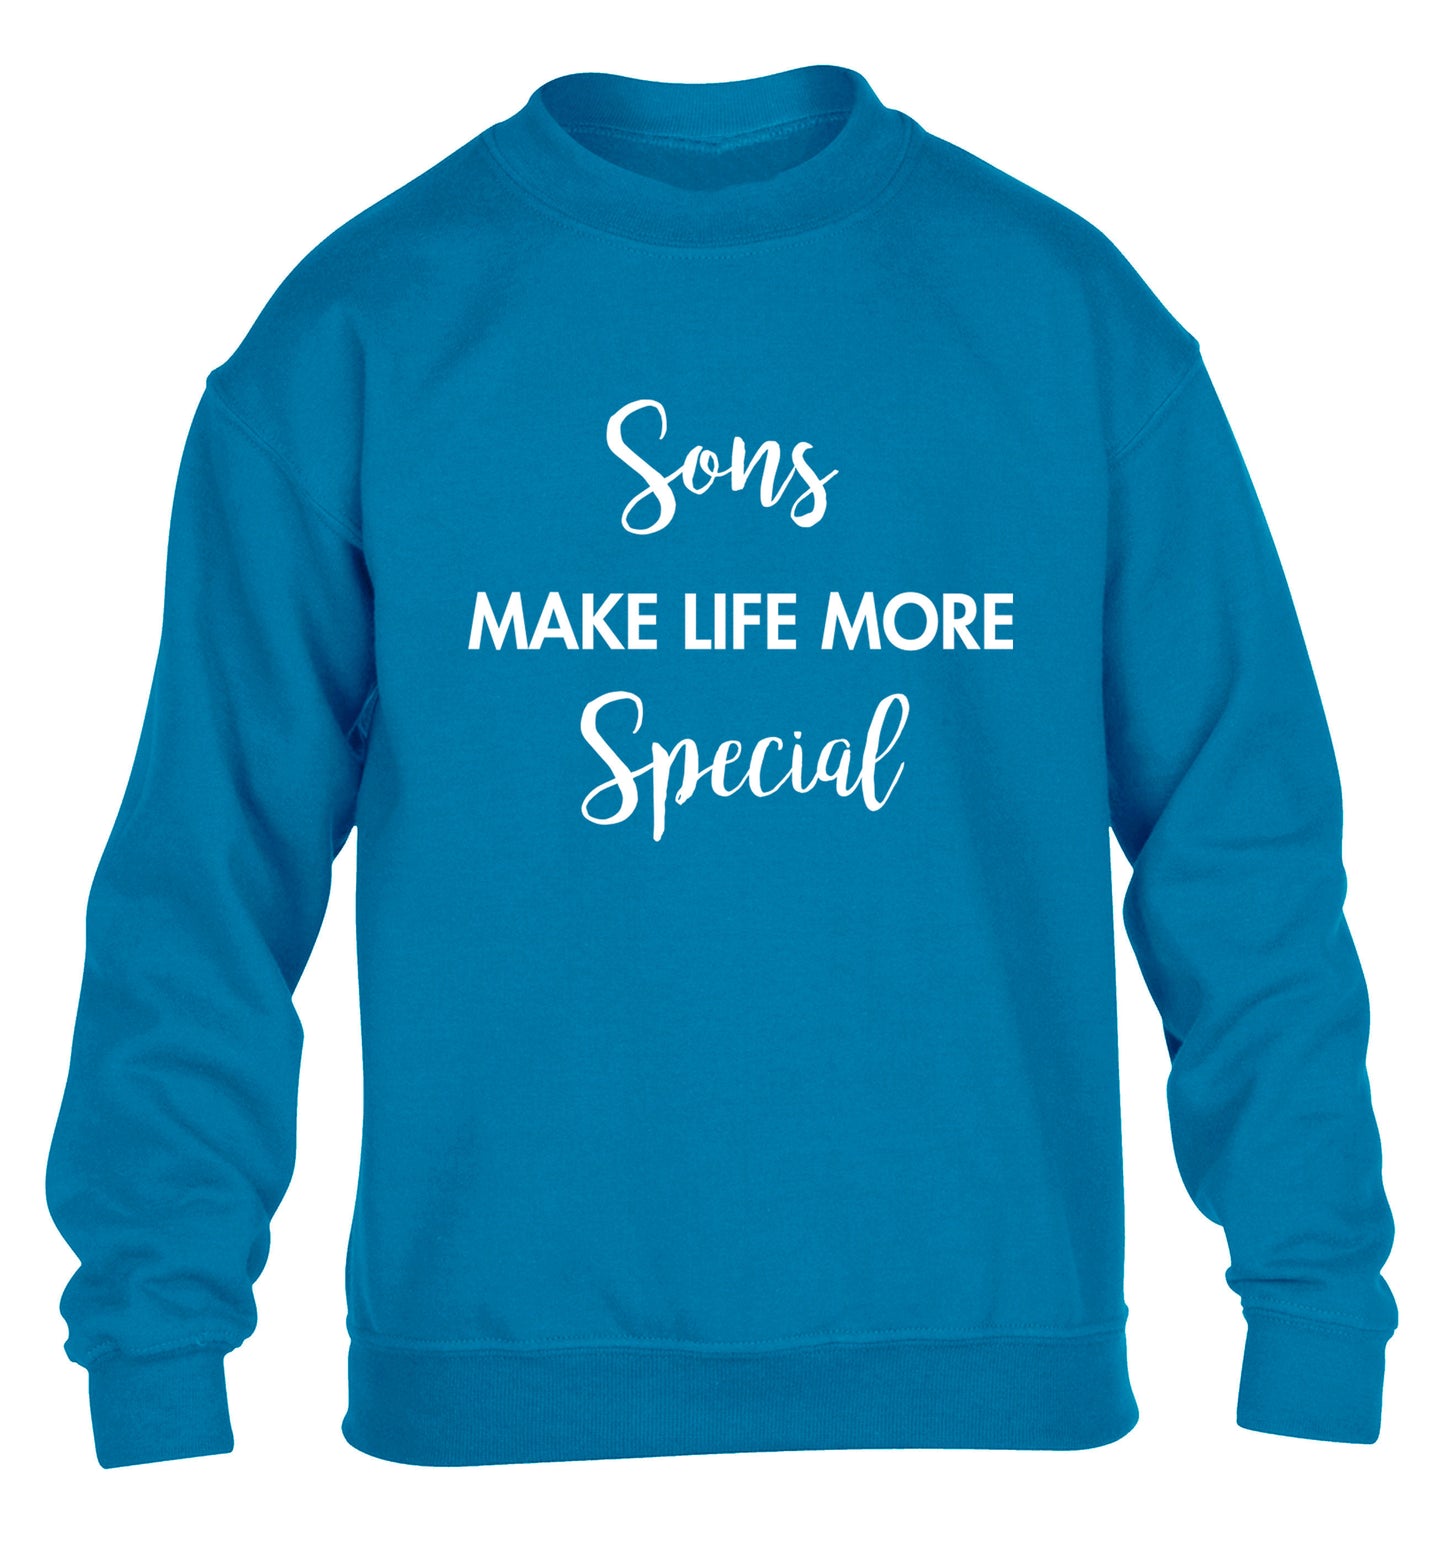 Sons make life more special children's blue sweater 12-14 Years